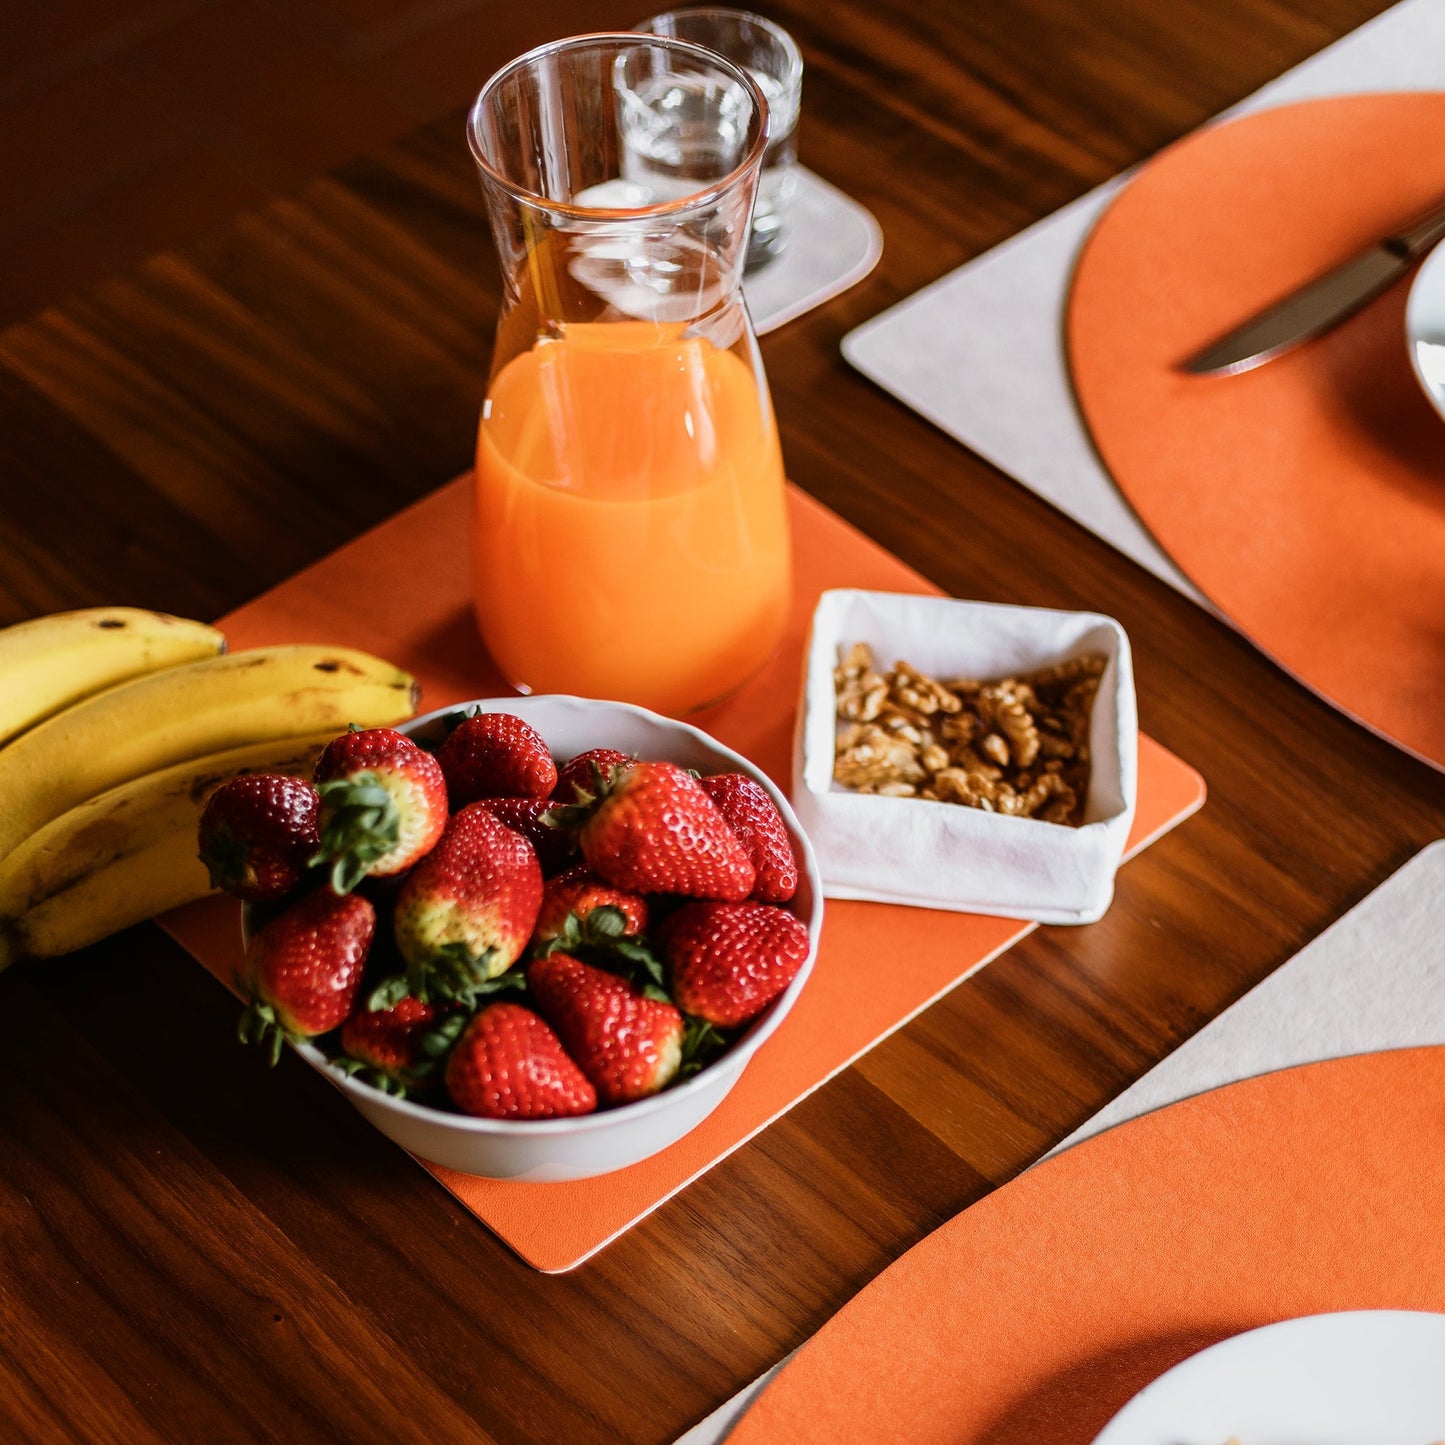 Three orange washable paper placemats sit on a wooden table in a place setting. The hero of the image is a square orange washable paper placemat containing bananas, a carafe of orange juice, a bowl of strawberries and a washable paper small tray containing nuts.